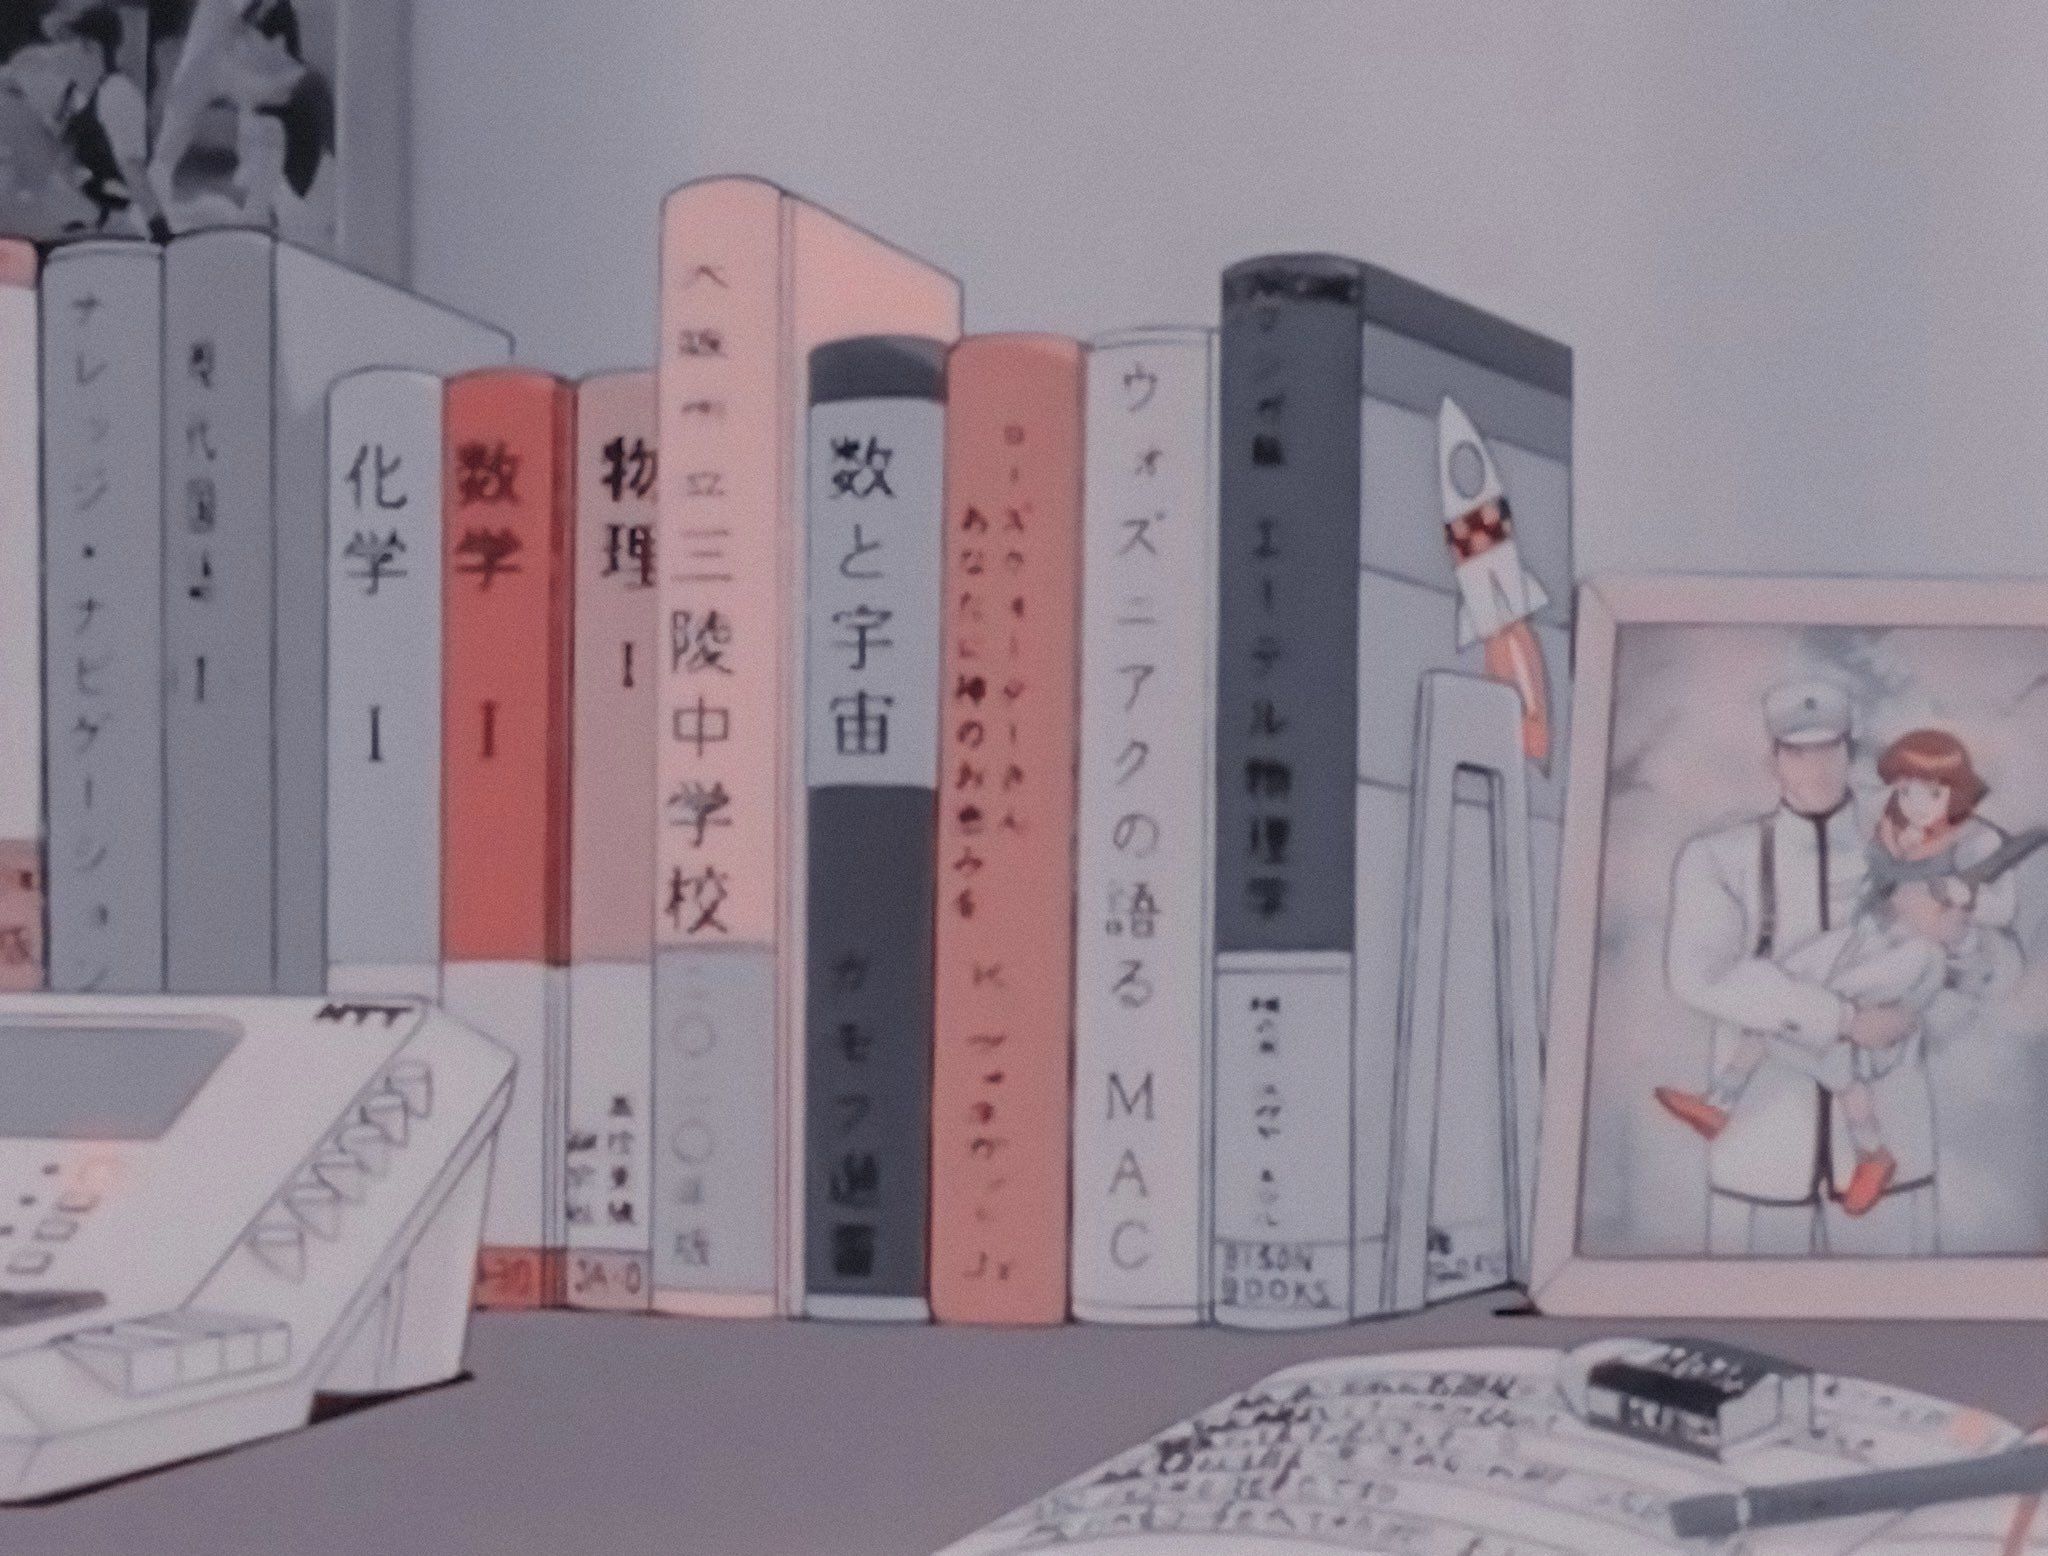 A collection of books on the table - 90s anime